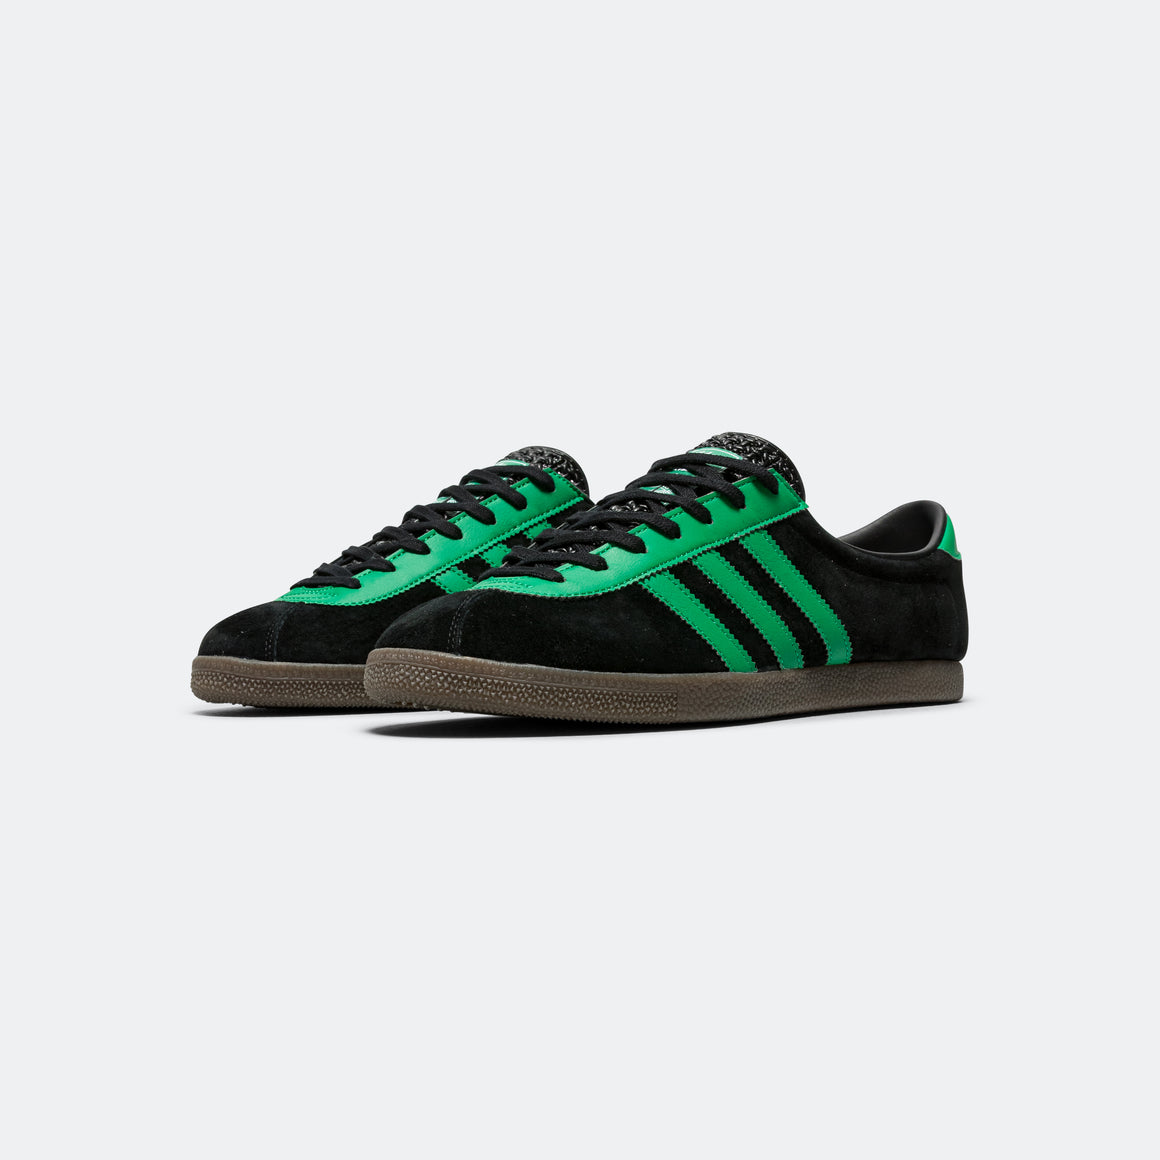 adidas - London - Core Black/Green-Gum - UP THERE